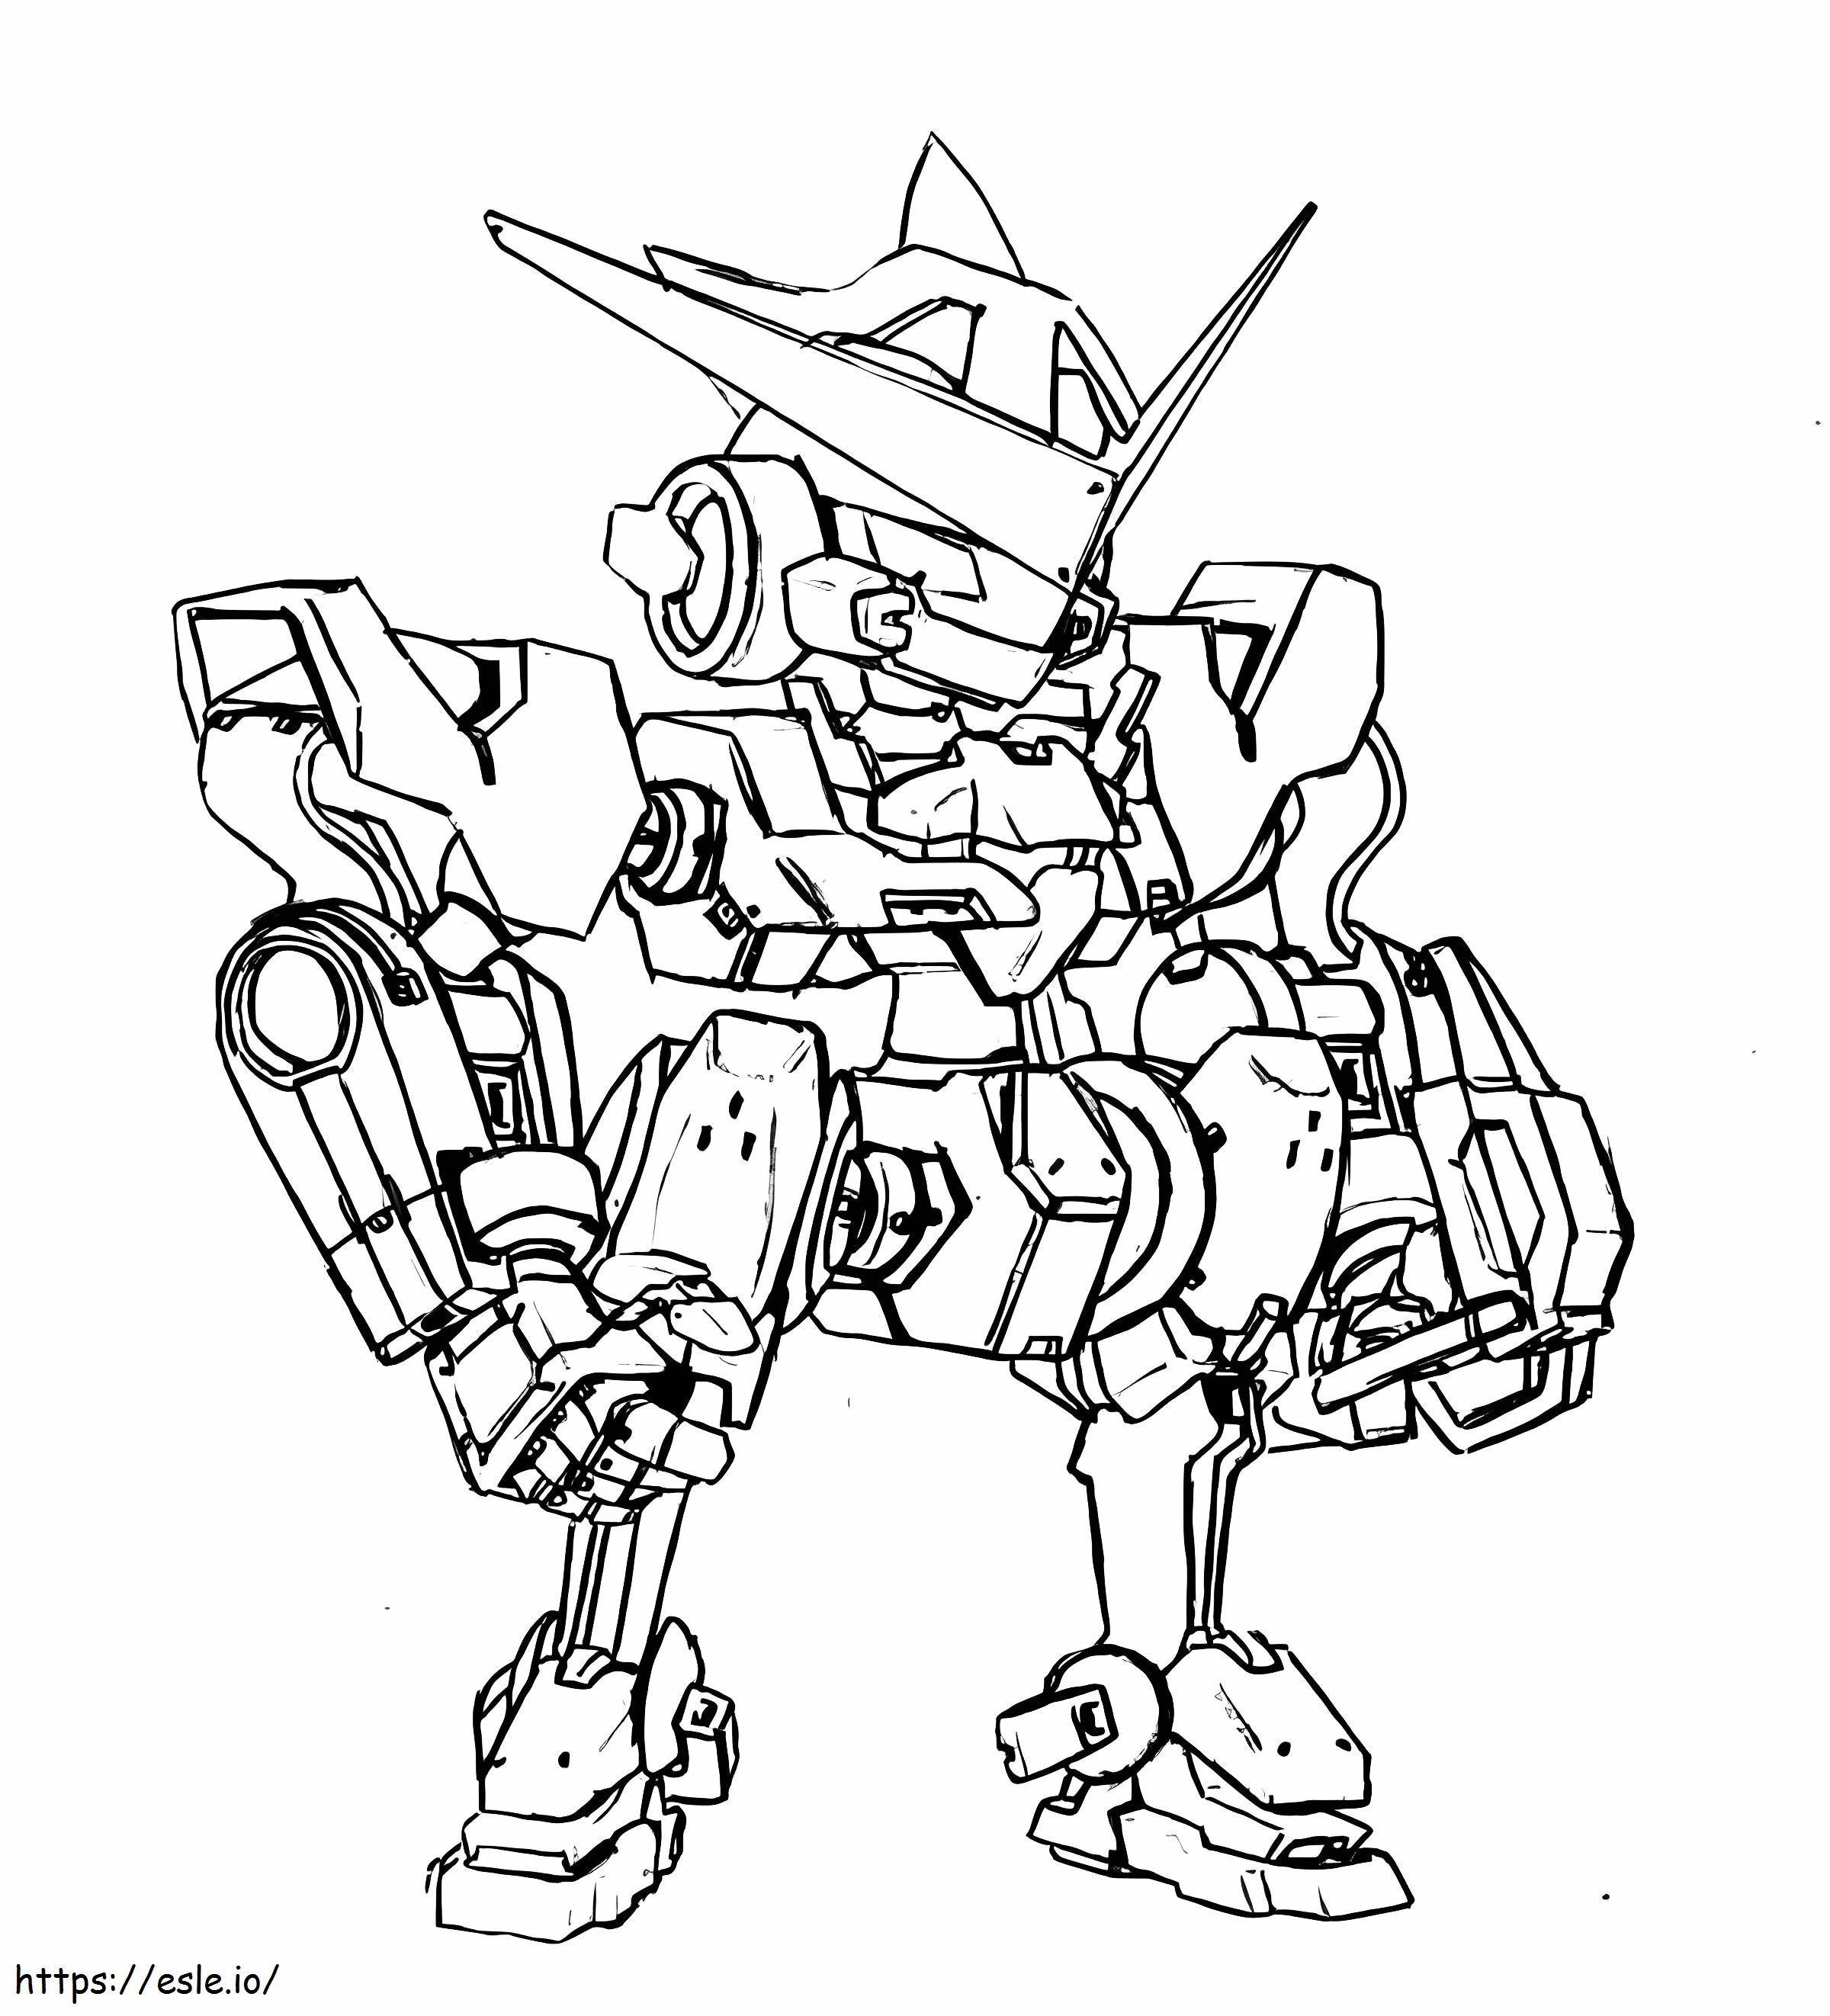 Medabots Sketch coloring page